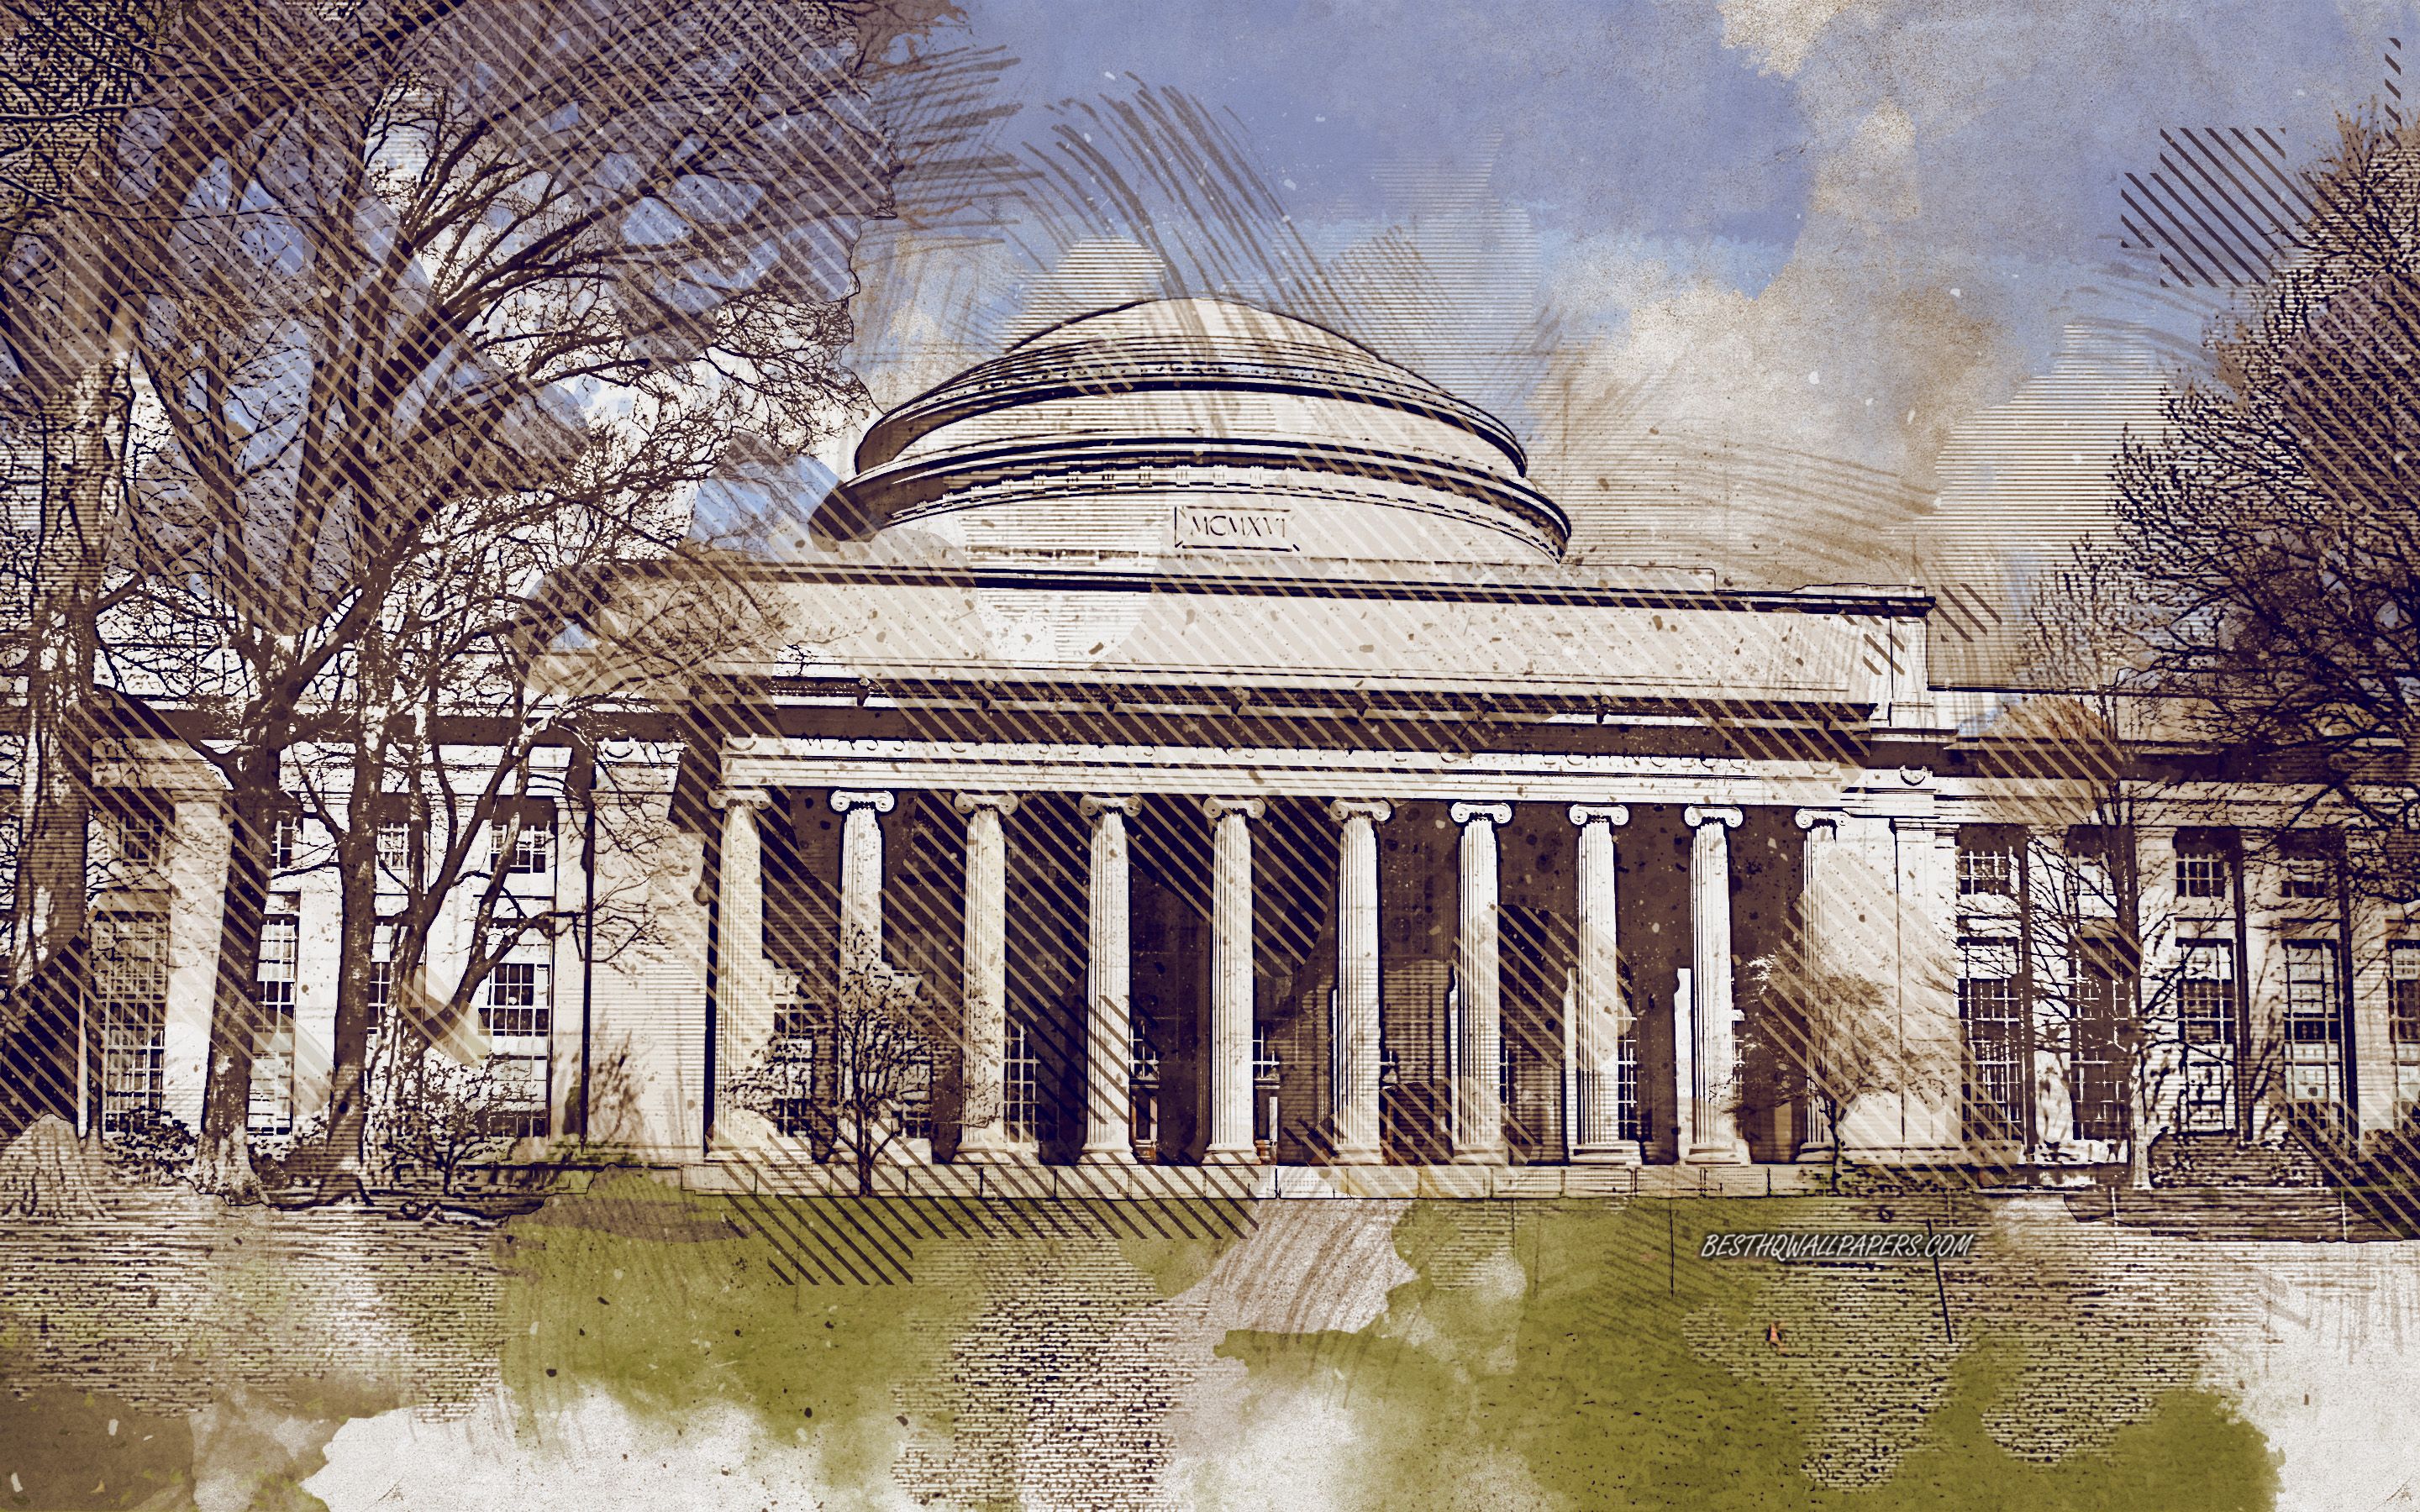 Download wallpaper Massachusetts Institute of Technology, Cambridge, Massachusetts, USA, grunge art, creative art, painted Massachusetts Institute of Technology, drawing, digital art for desktop with resolution 2880x1800. High Quality HD picture